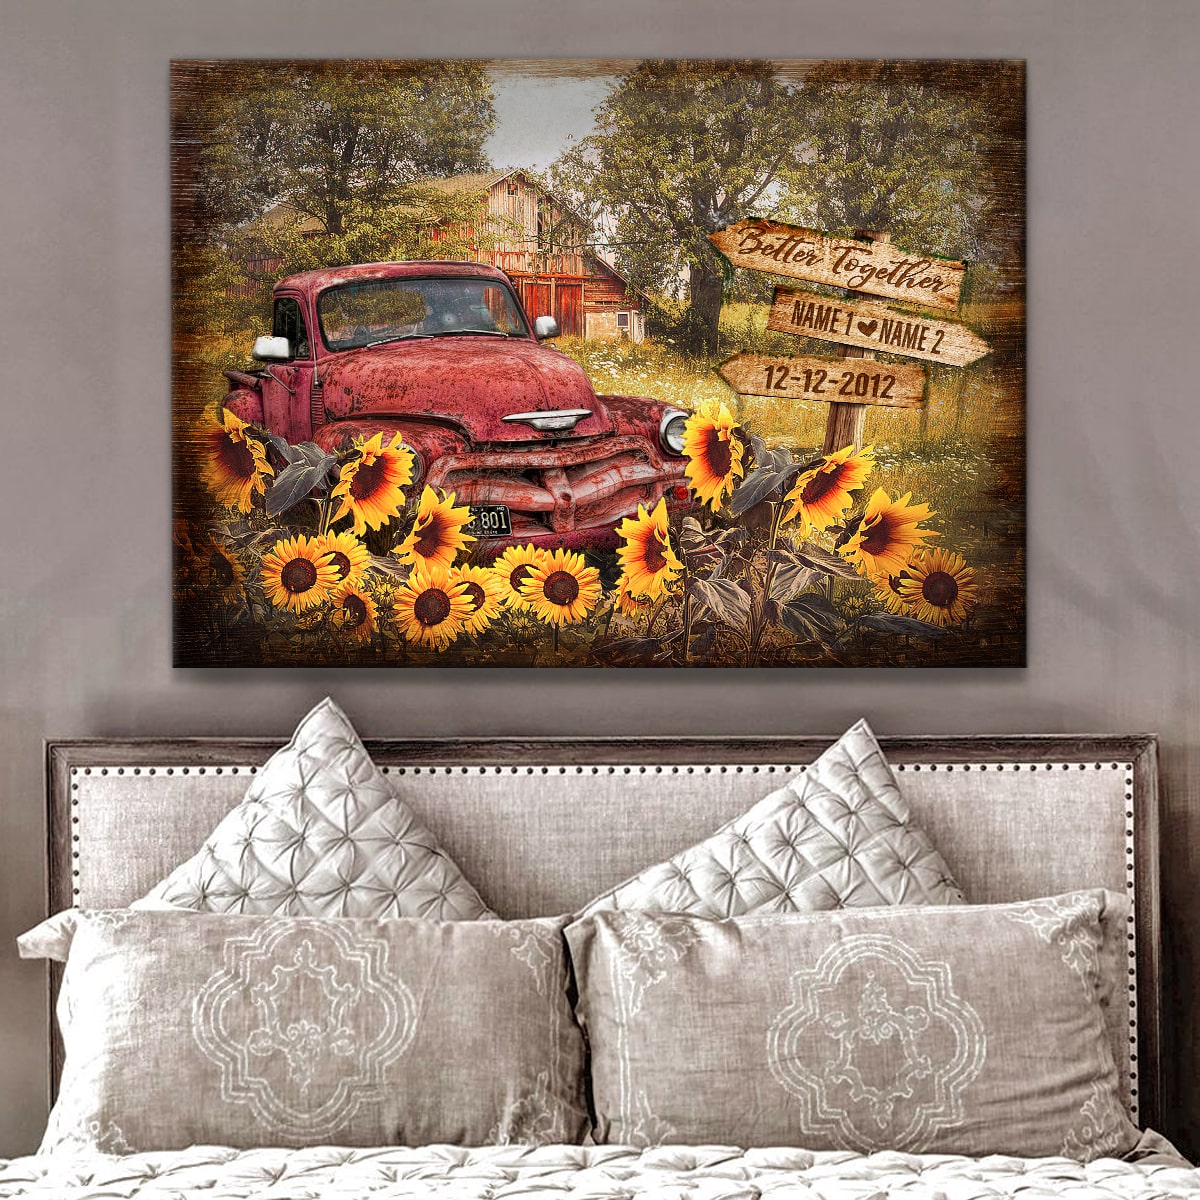 Beautiful Summer Country Scene And Pickup Truck Better Together Custom Names And Date Personalized Canvas Prints Wall Art Decor